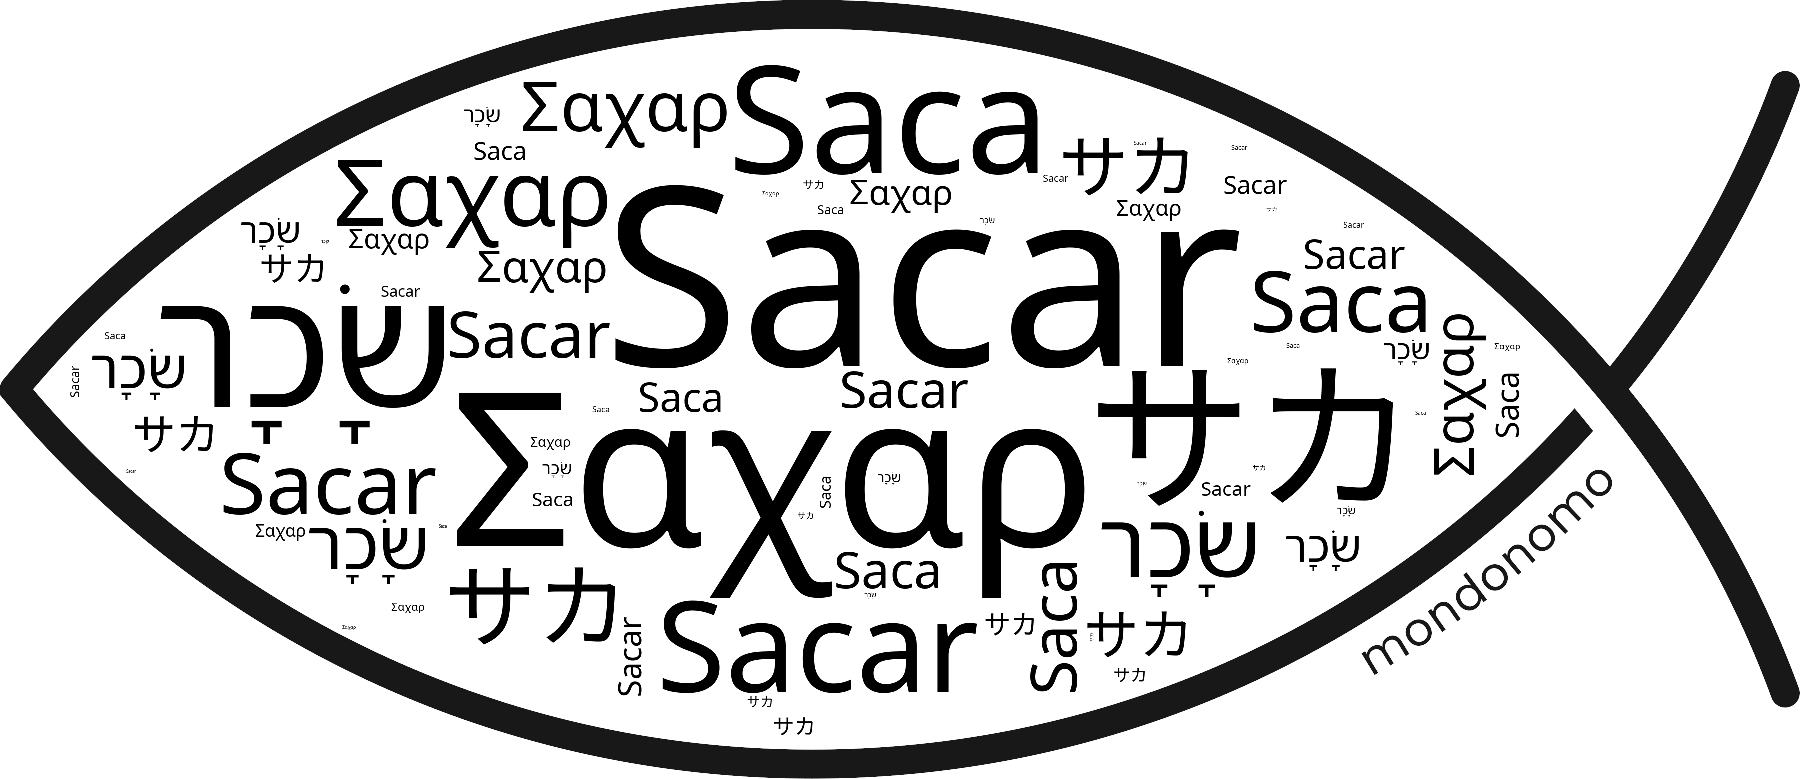 Name Sacar in the world's Bibles